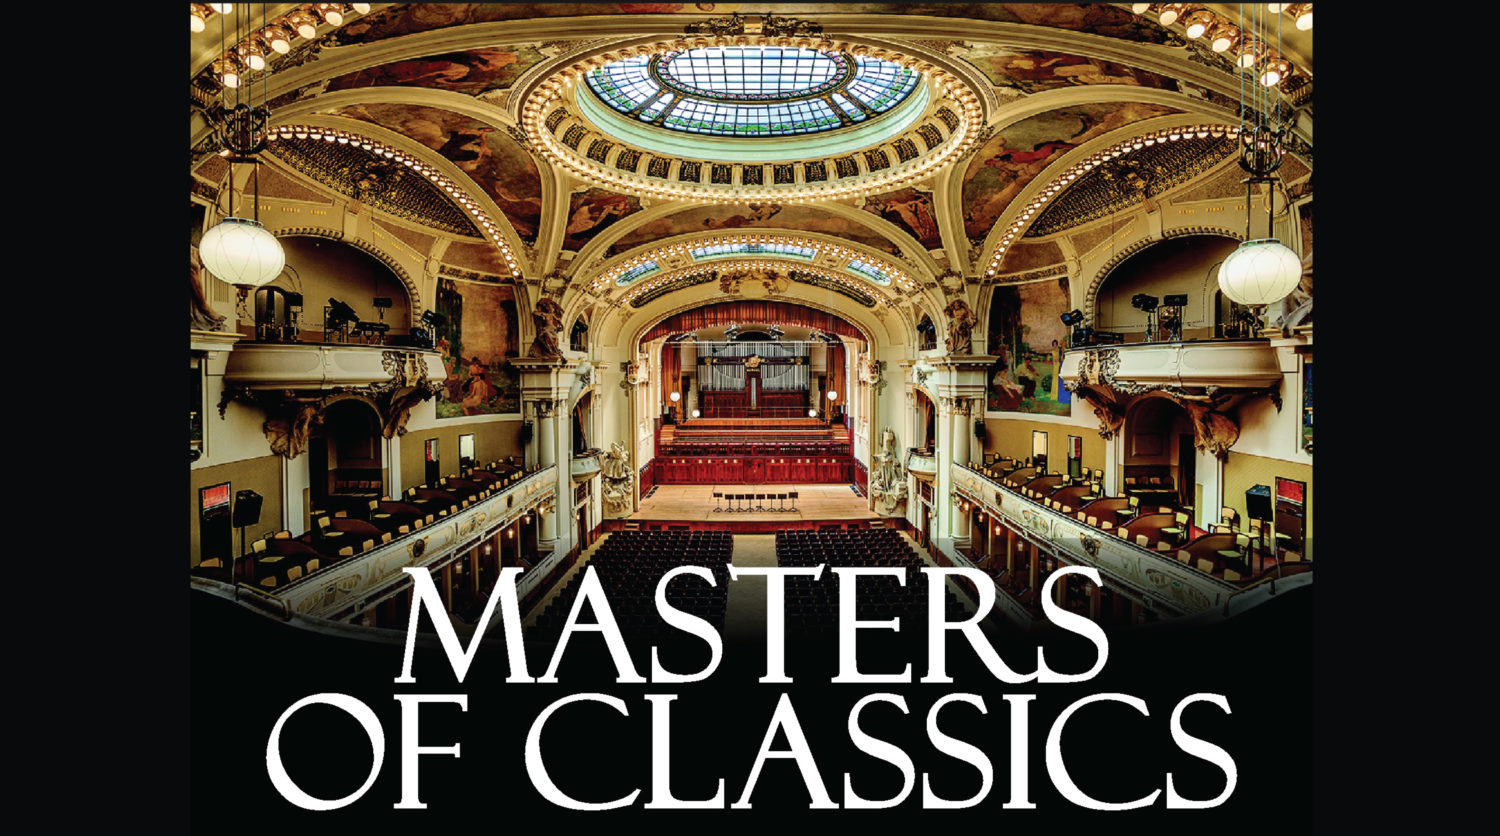 MASTERS OF CLASSICS IN THE MUNICIPAL HOUSE 12.02.2019